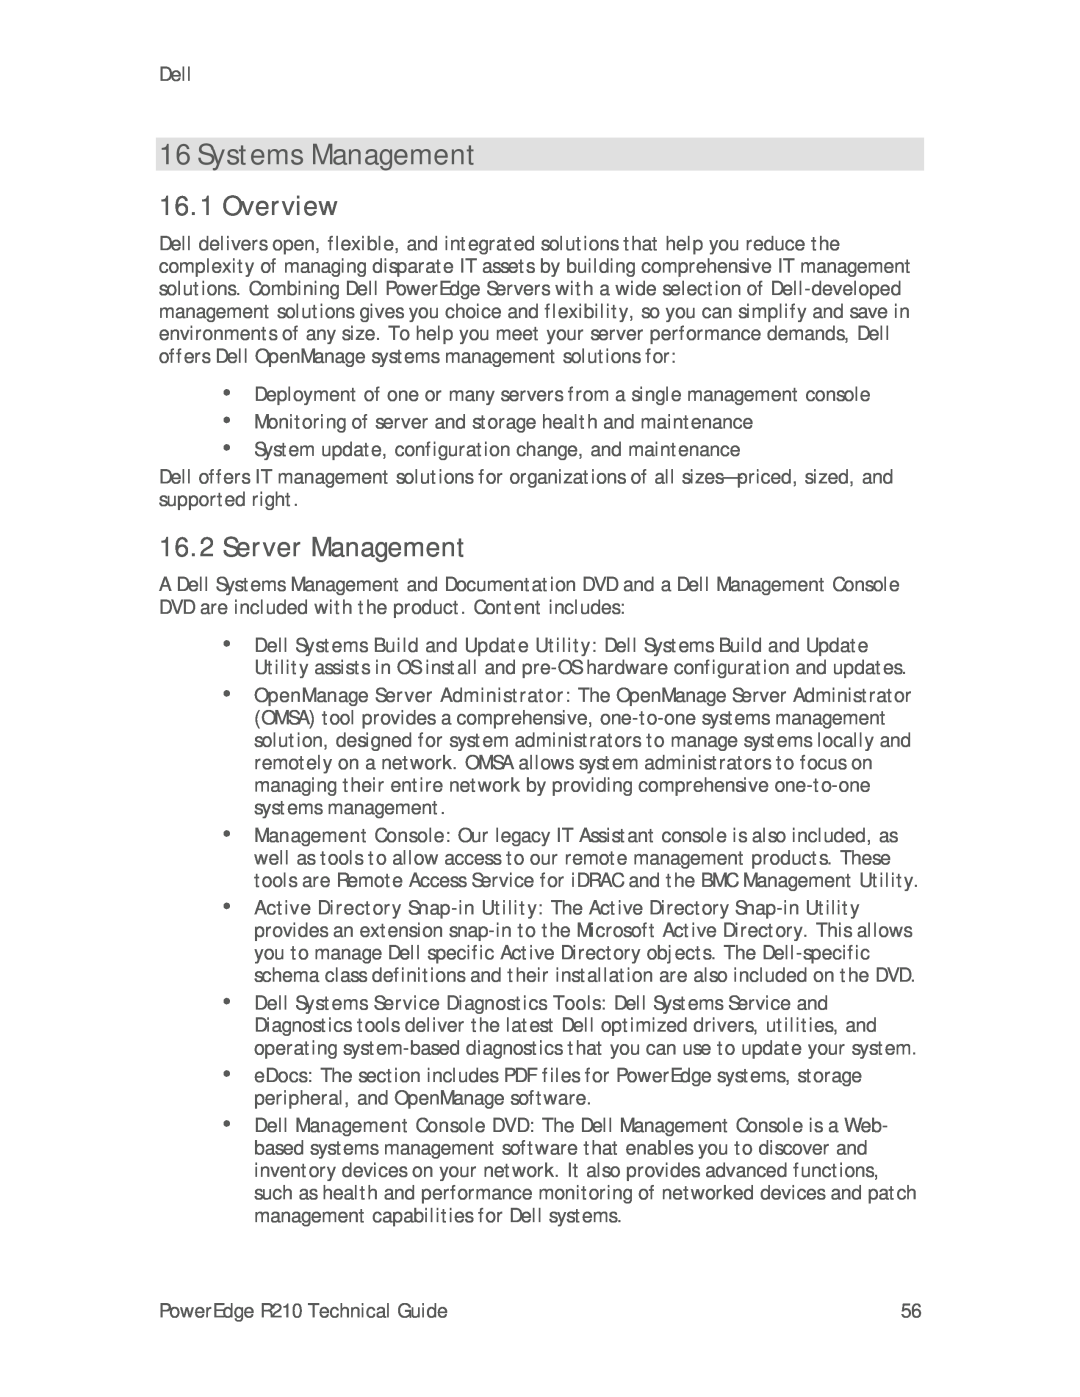 Dell R210 manual Systems Management, Overview, Server Management 